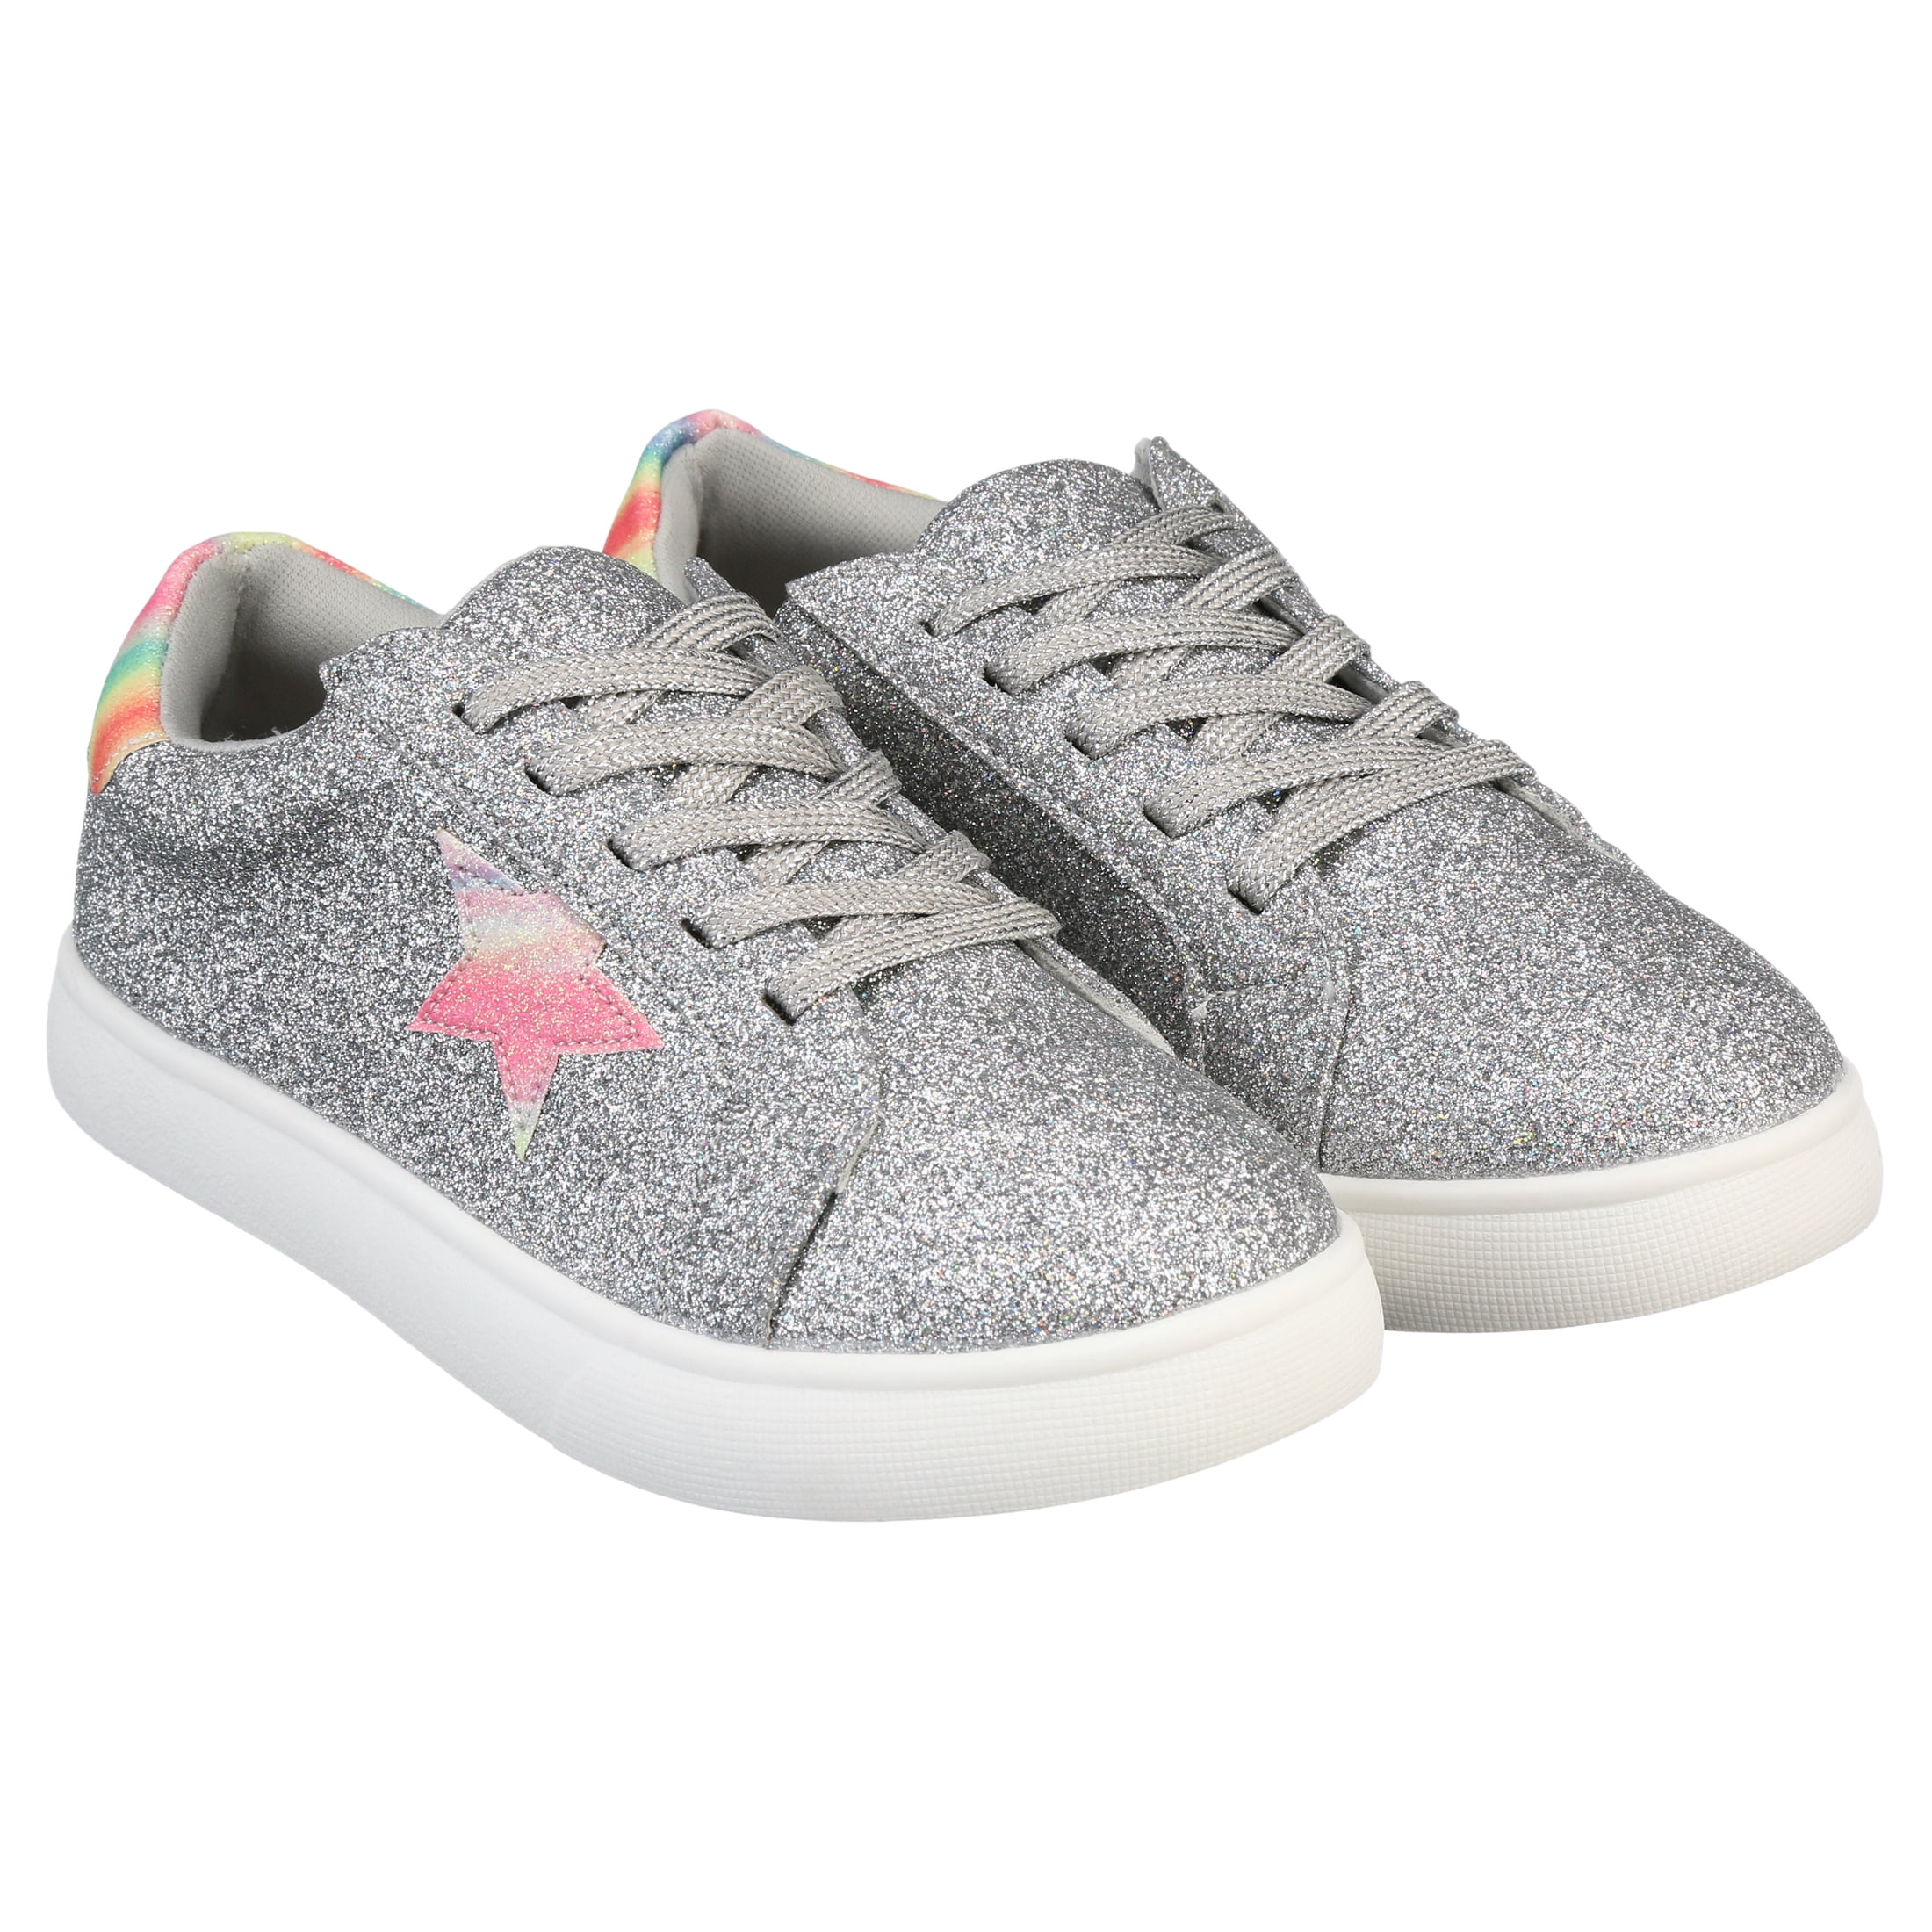 Garanimals Baby Girl Athletic Shoes Pink Gray Silver Glitter Size 5 Pre Walk NEW 